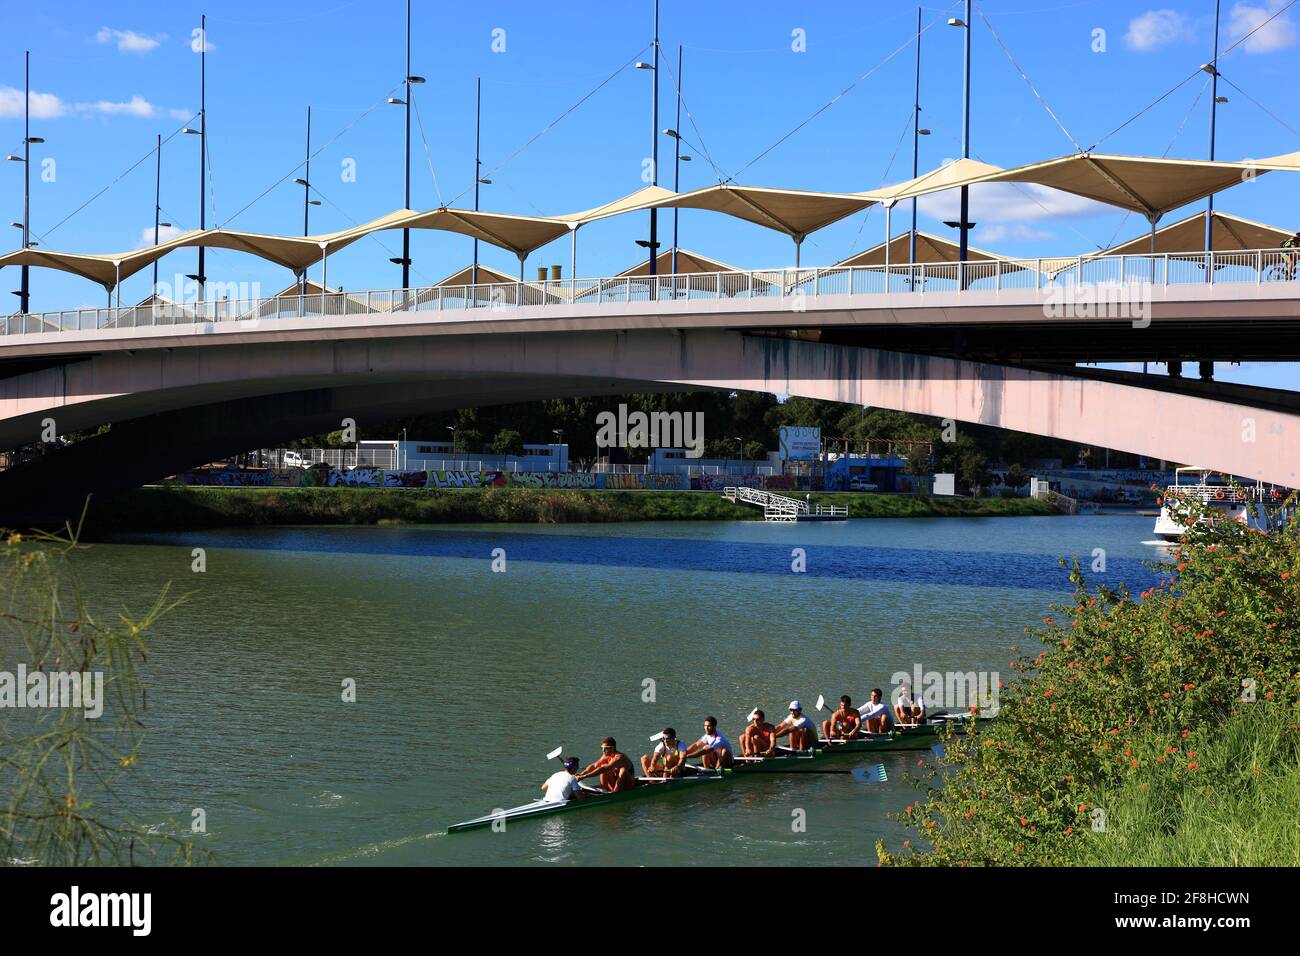 Spain, Andalusia, Seville, rowing boat on river Guadalquivir Stock Photo